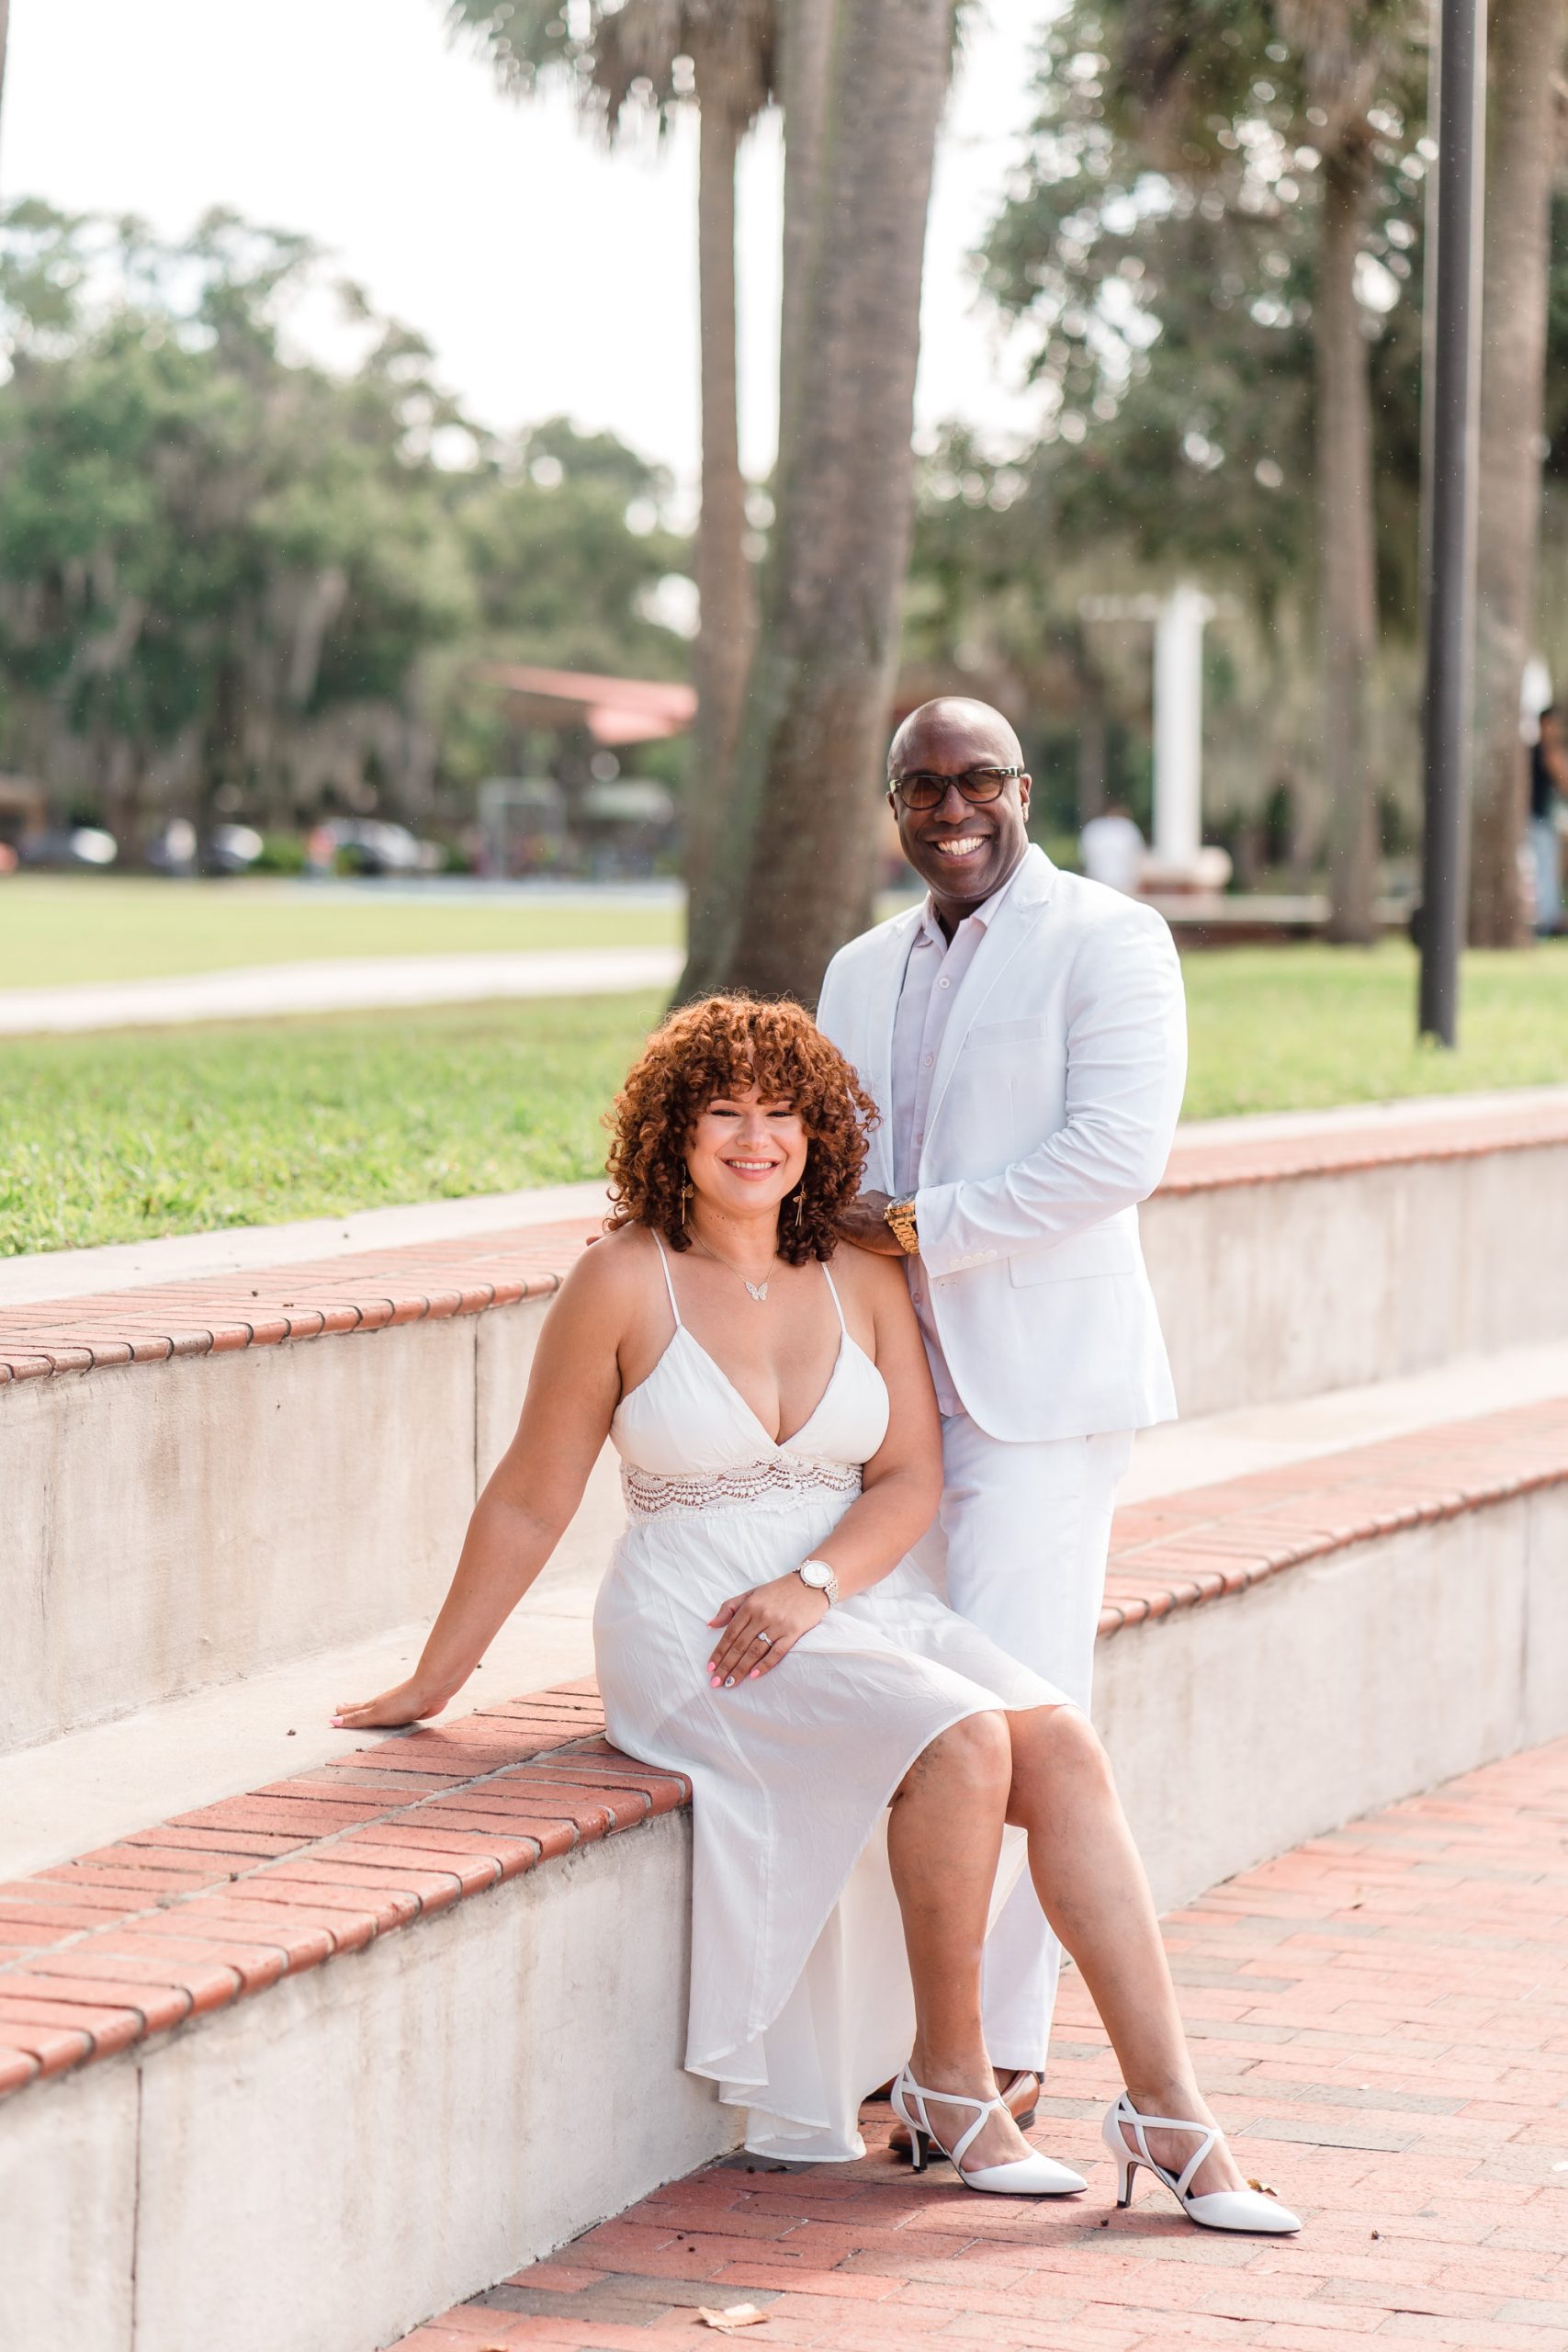 Engagement photography session at Kissimmee Lakefront Park